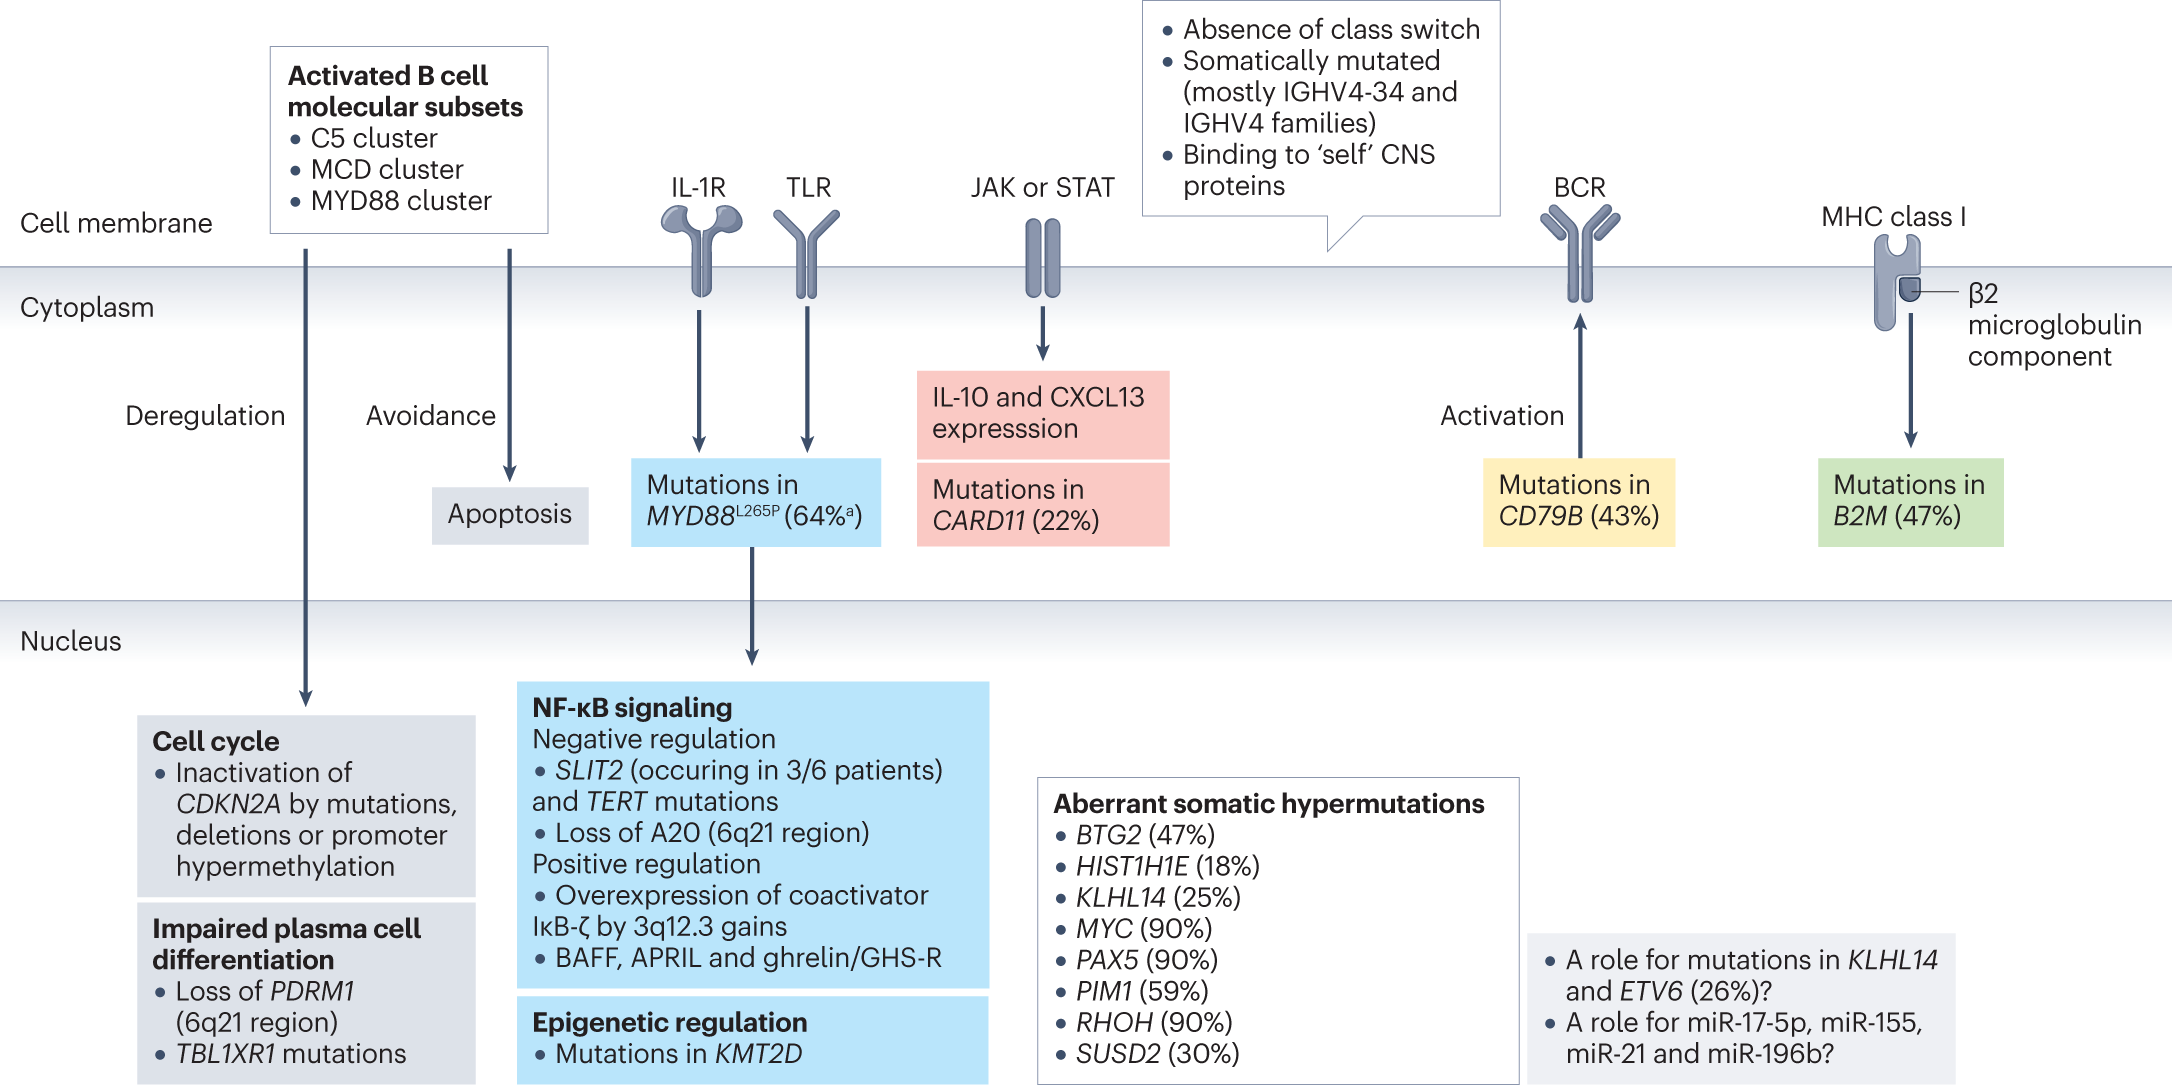 Primary central nervous system lymphoma | Nature Reviews Disease Primers